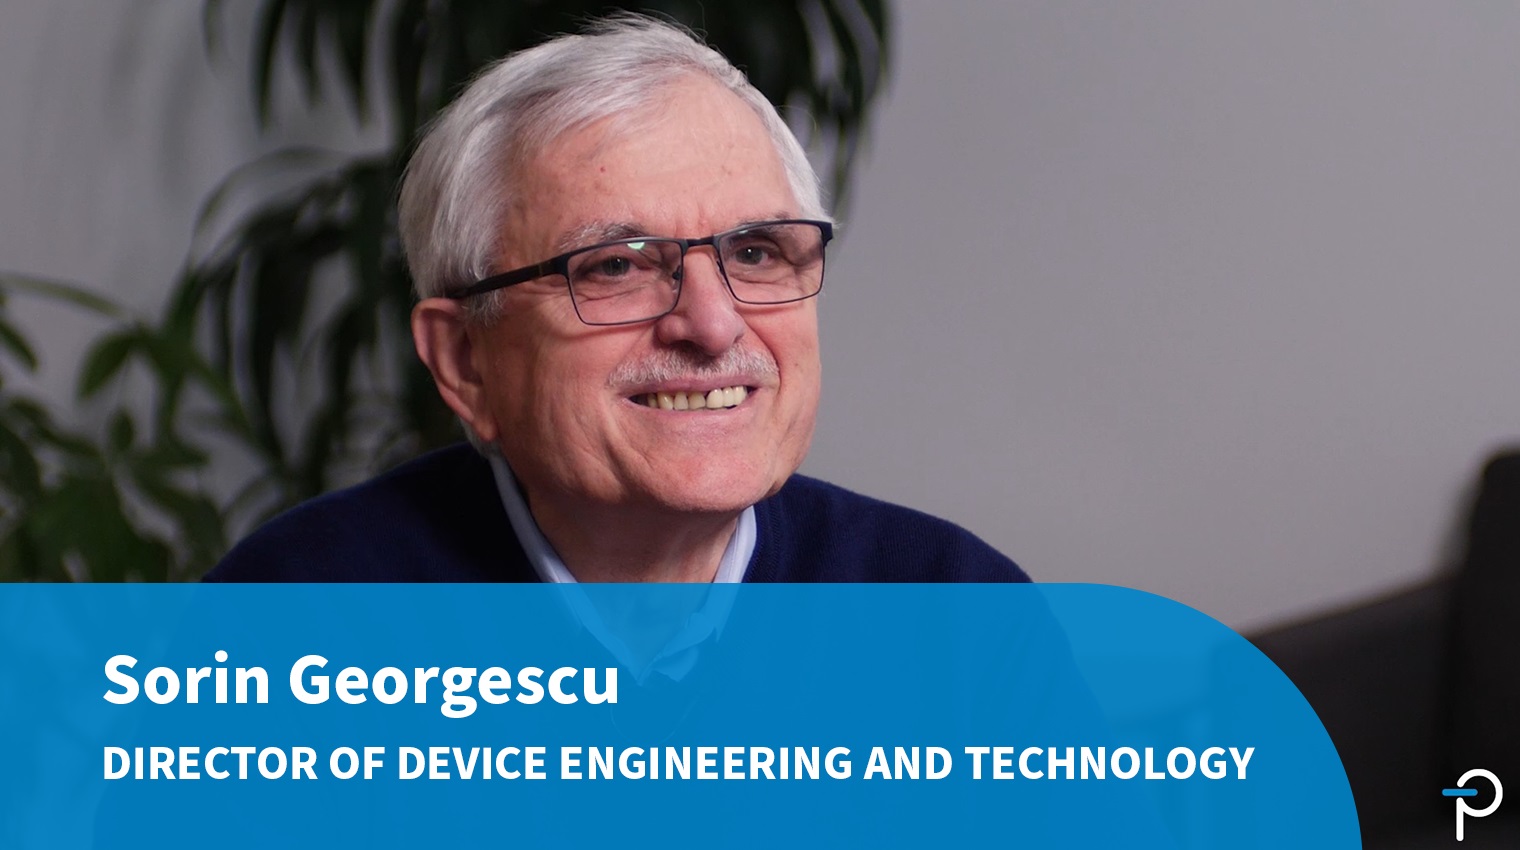 Sorin Georgescu - Director of Device Engineering and Technology